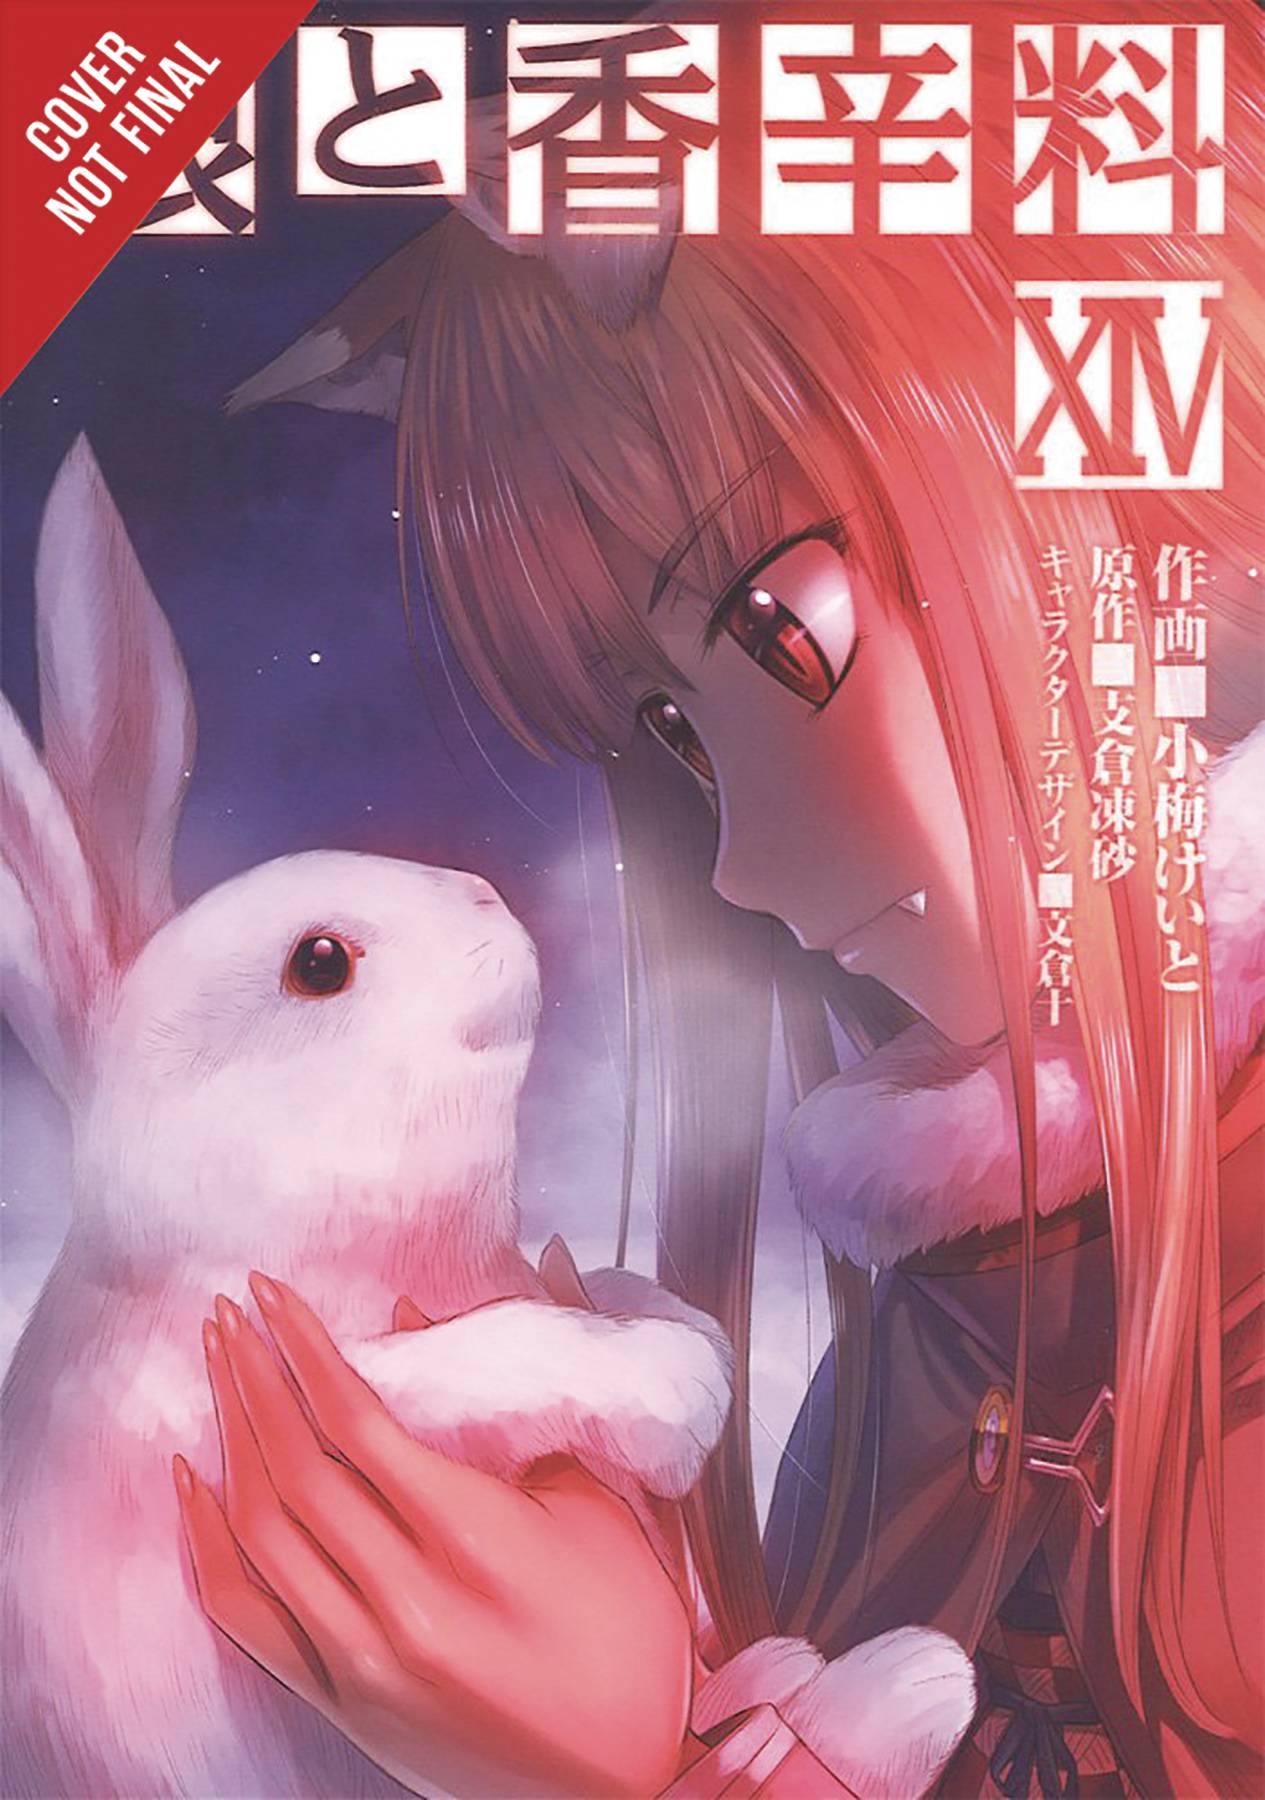 SPICE AND WOLF GN VOL 14 (MR)